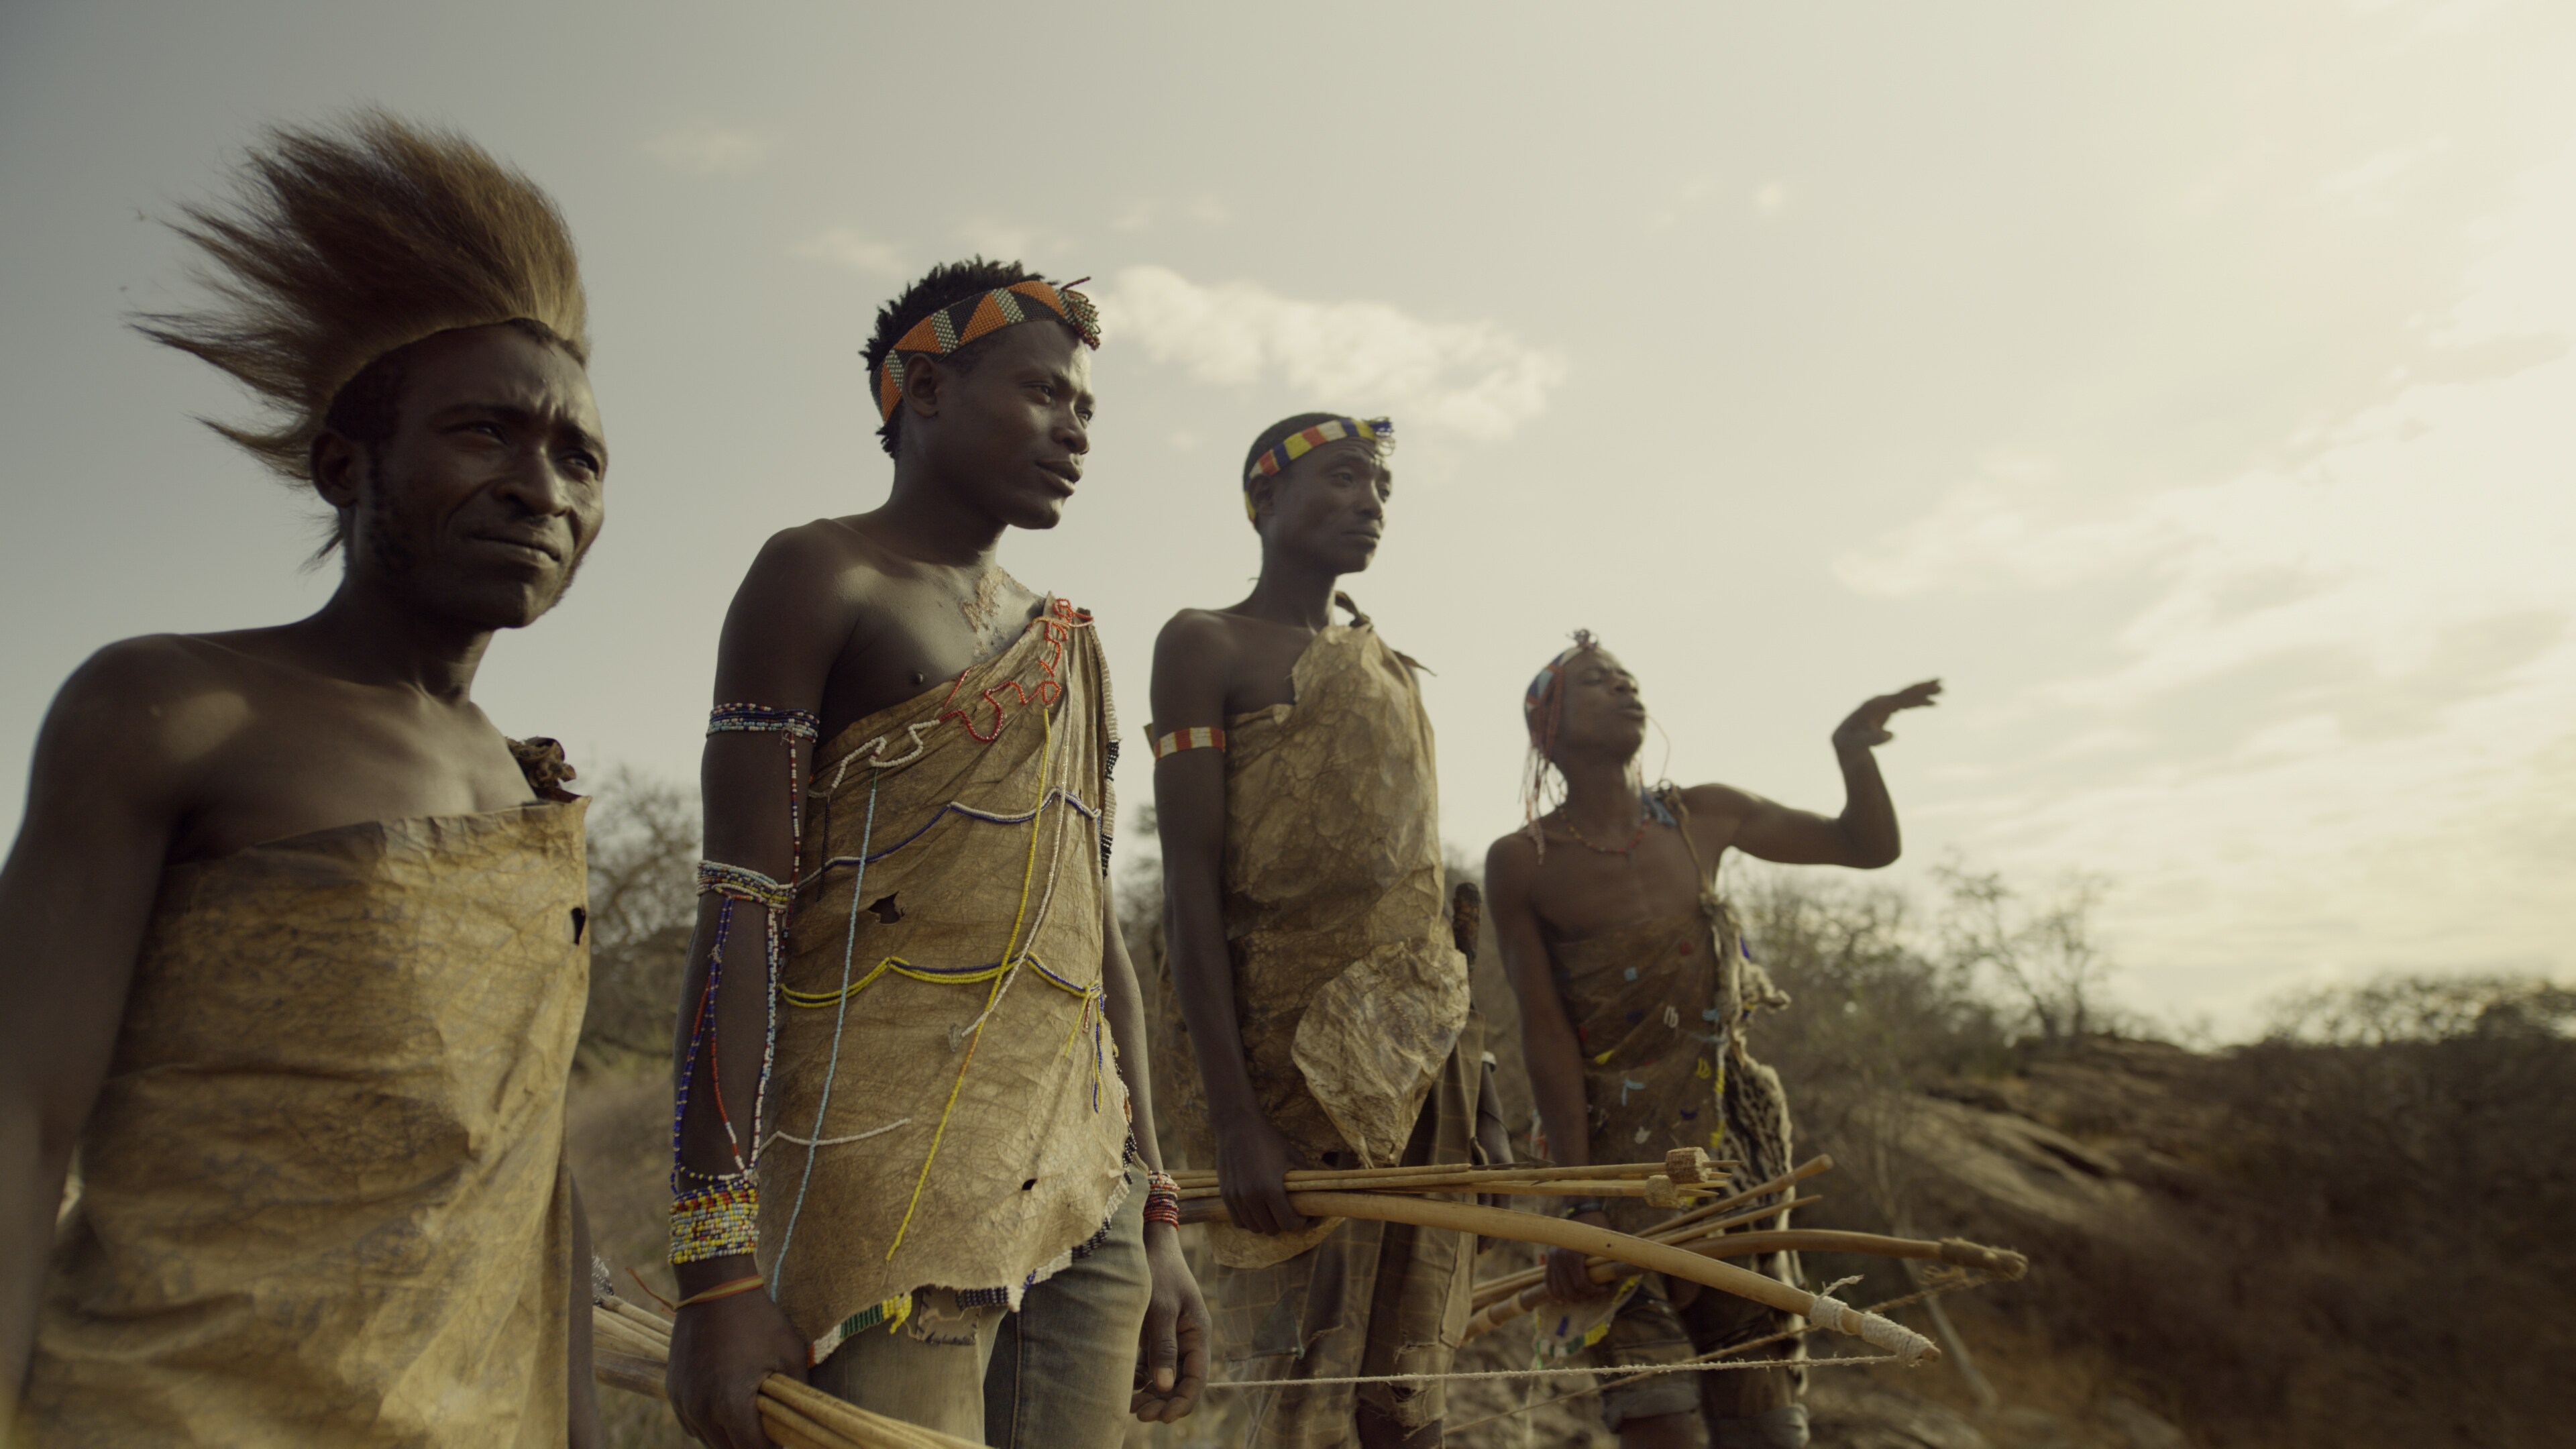 Hadza tribe members discuss their hunt. (National Geographic for Disney+)